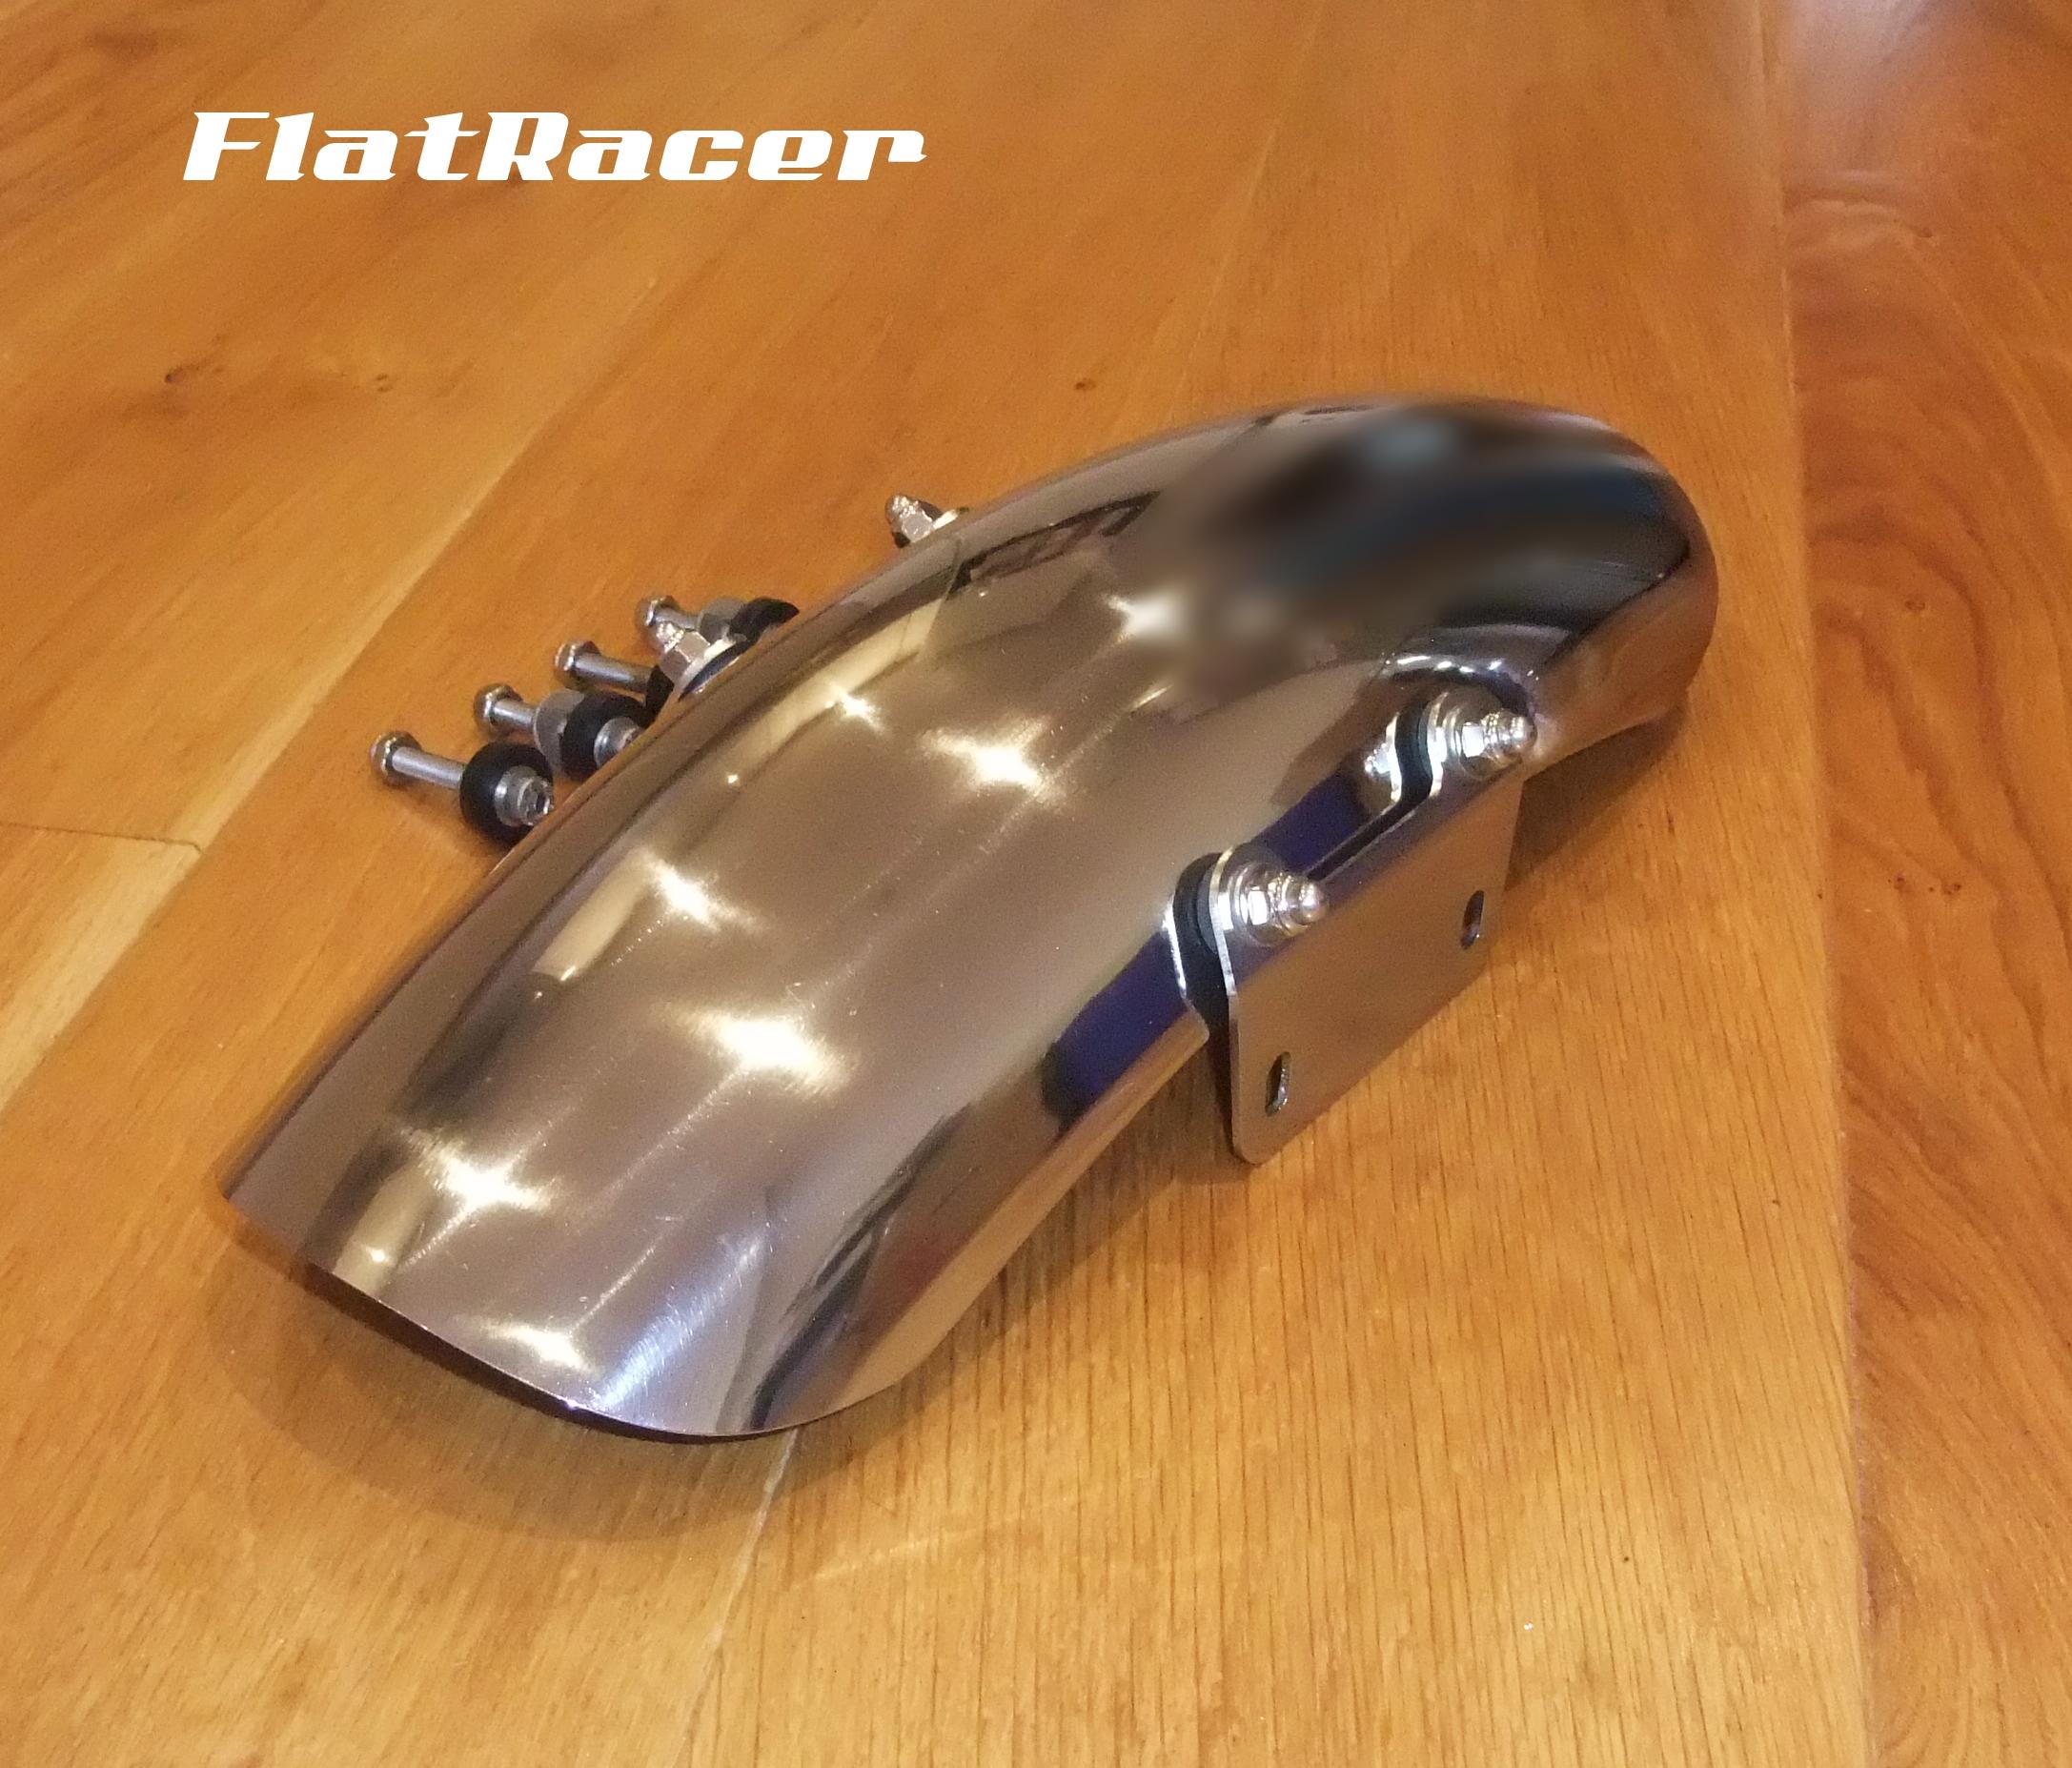 FlatRacer BMW Airhead Boxer Monolever (85 on) stainless steel short front mudguard